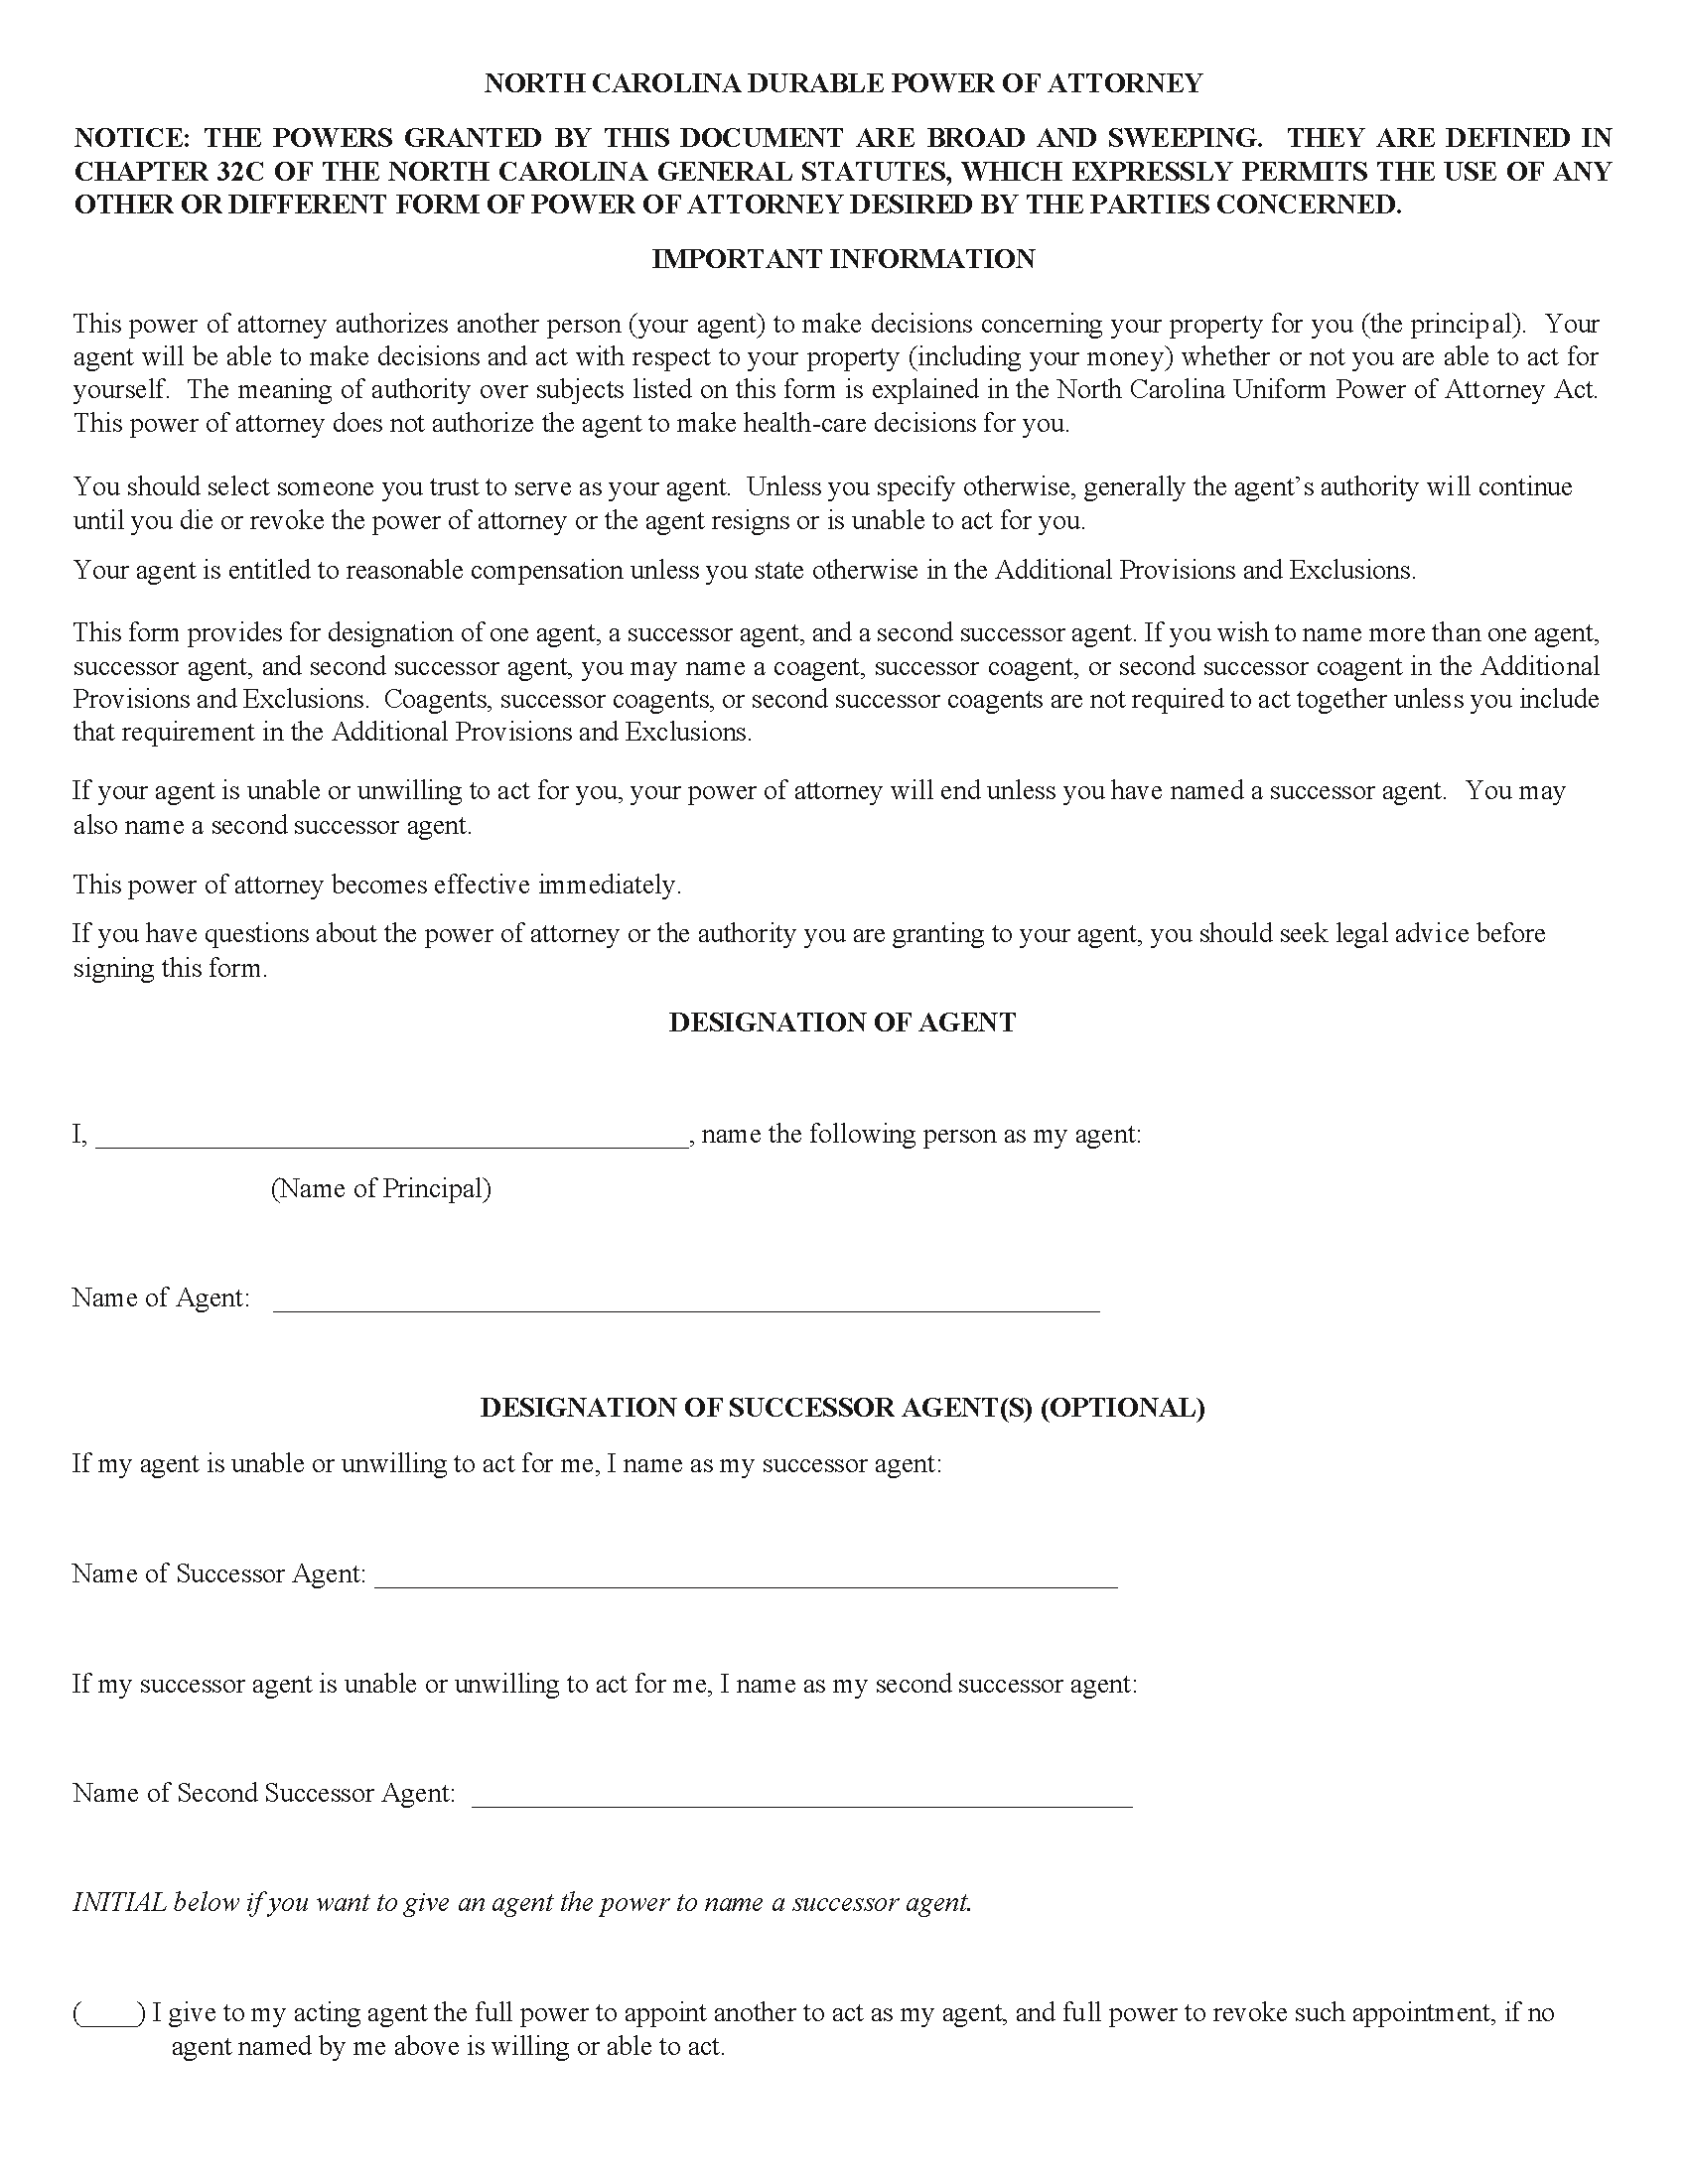 North Carolina Durable Power of Attorney Form Free Printable Legal Forms